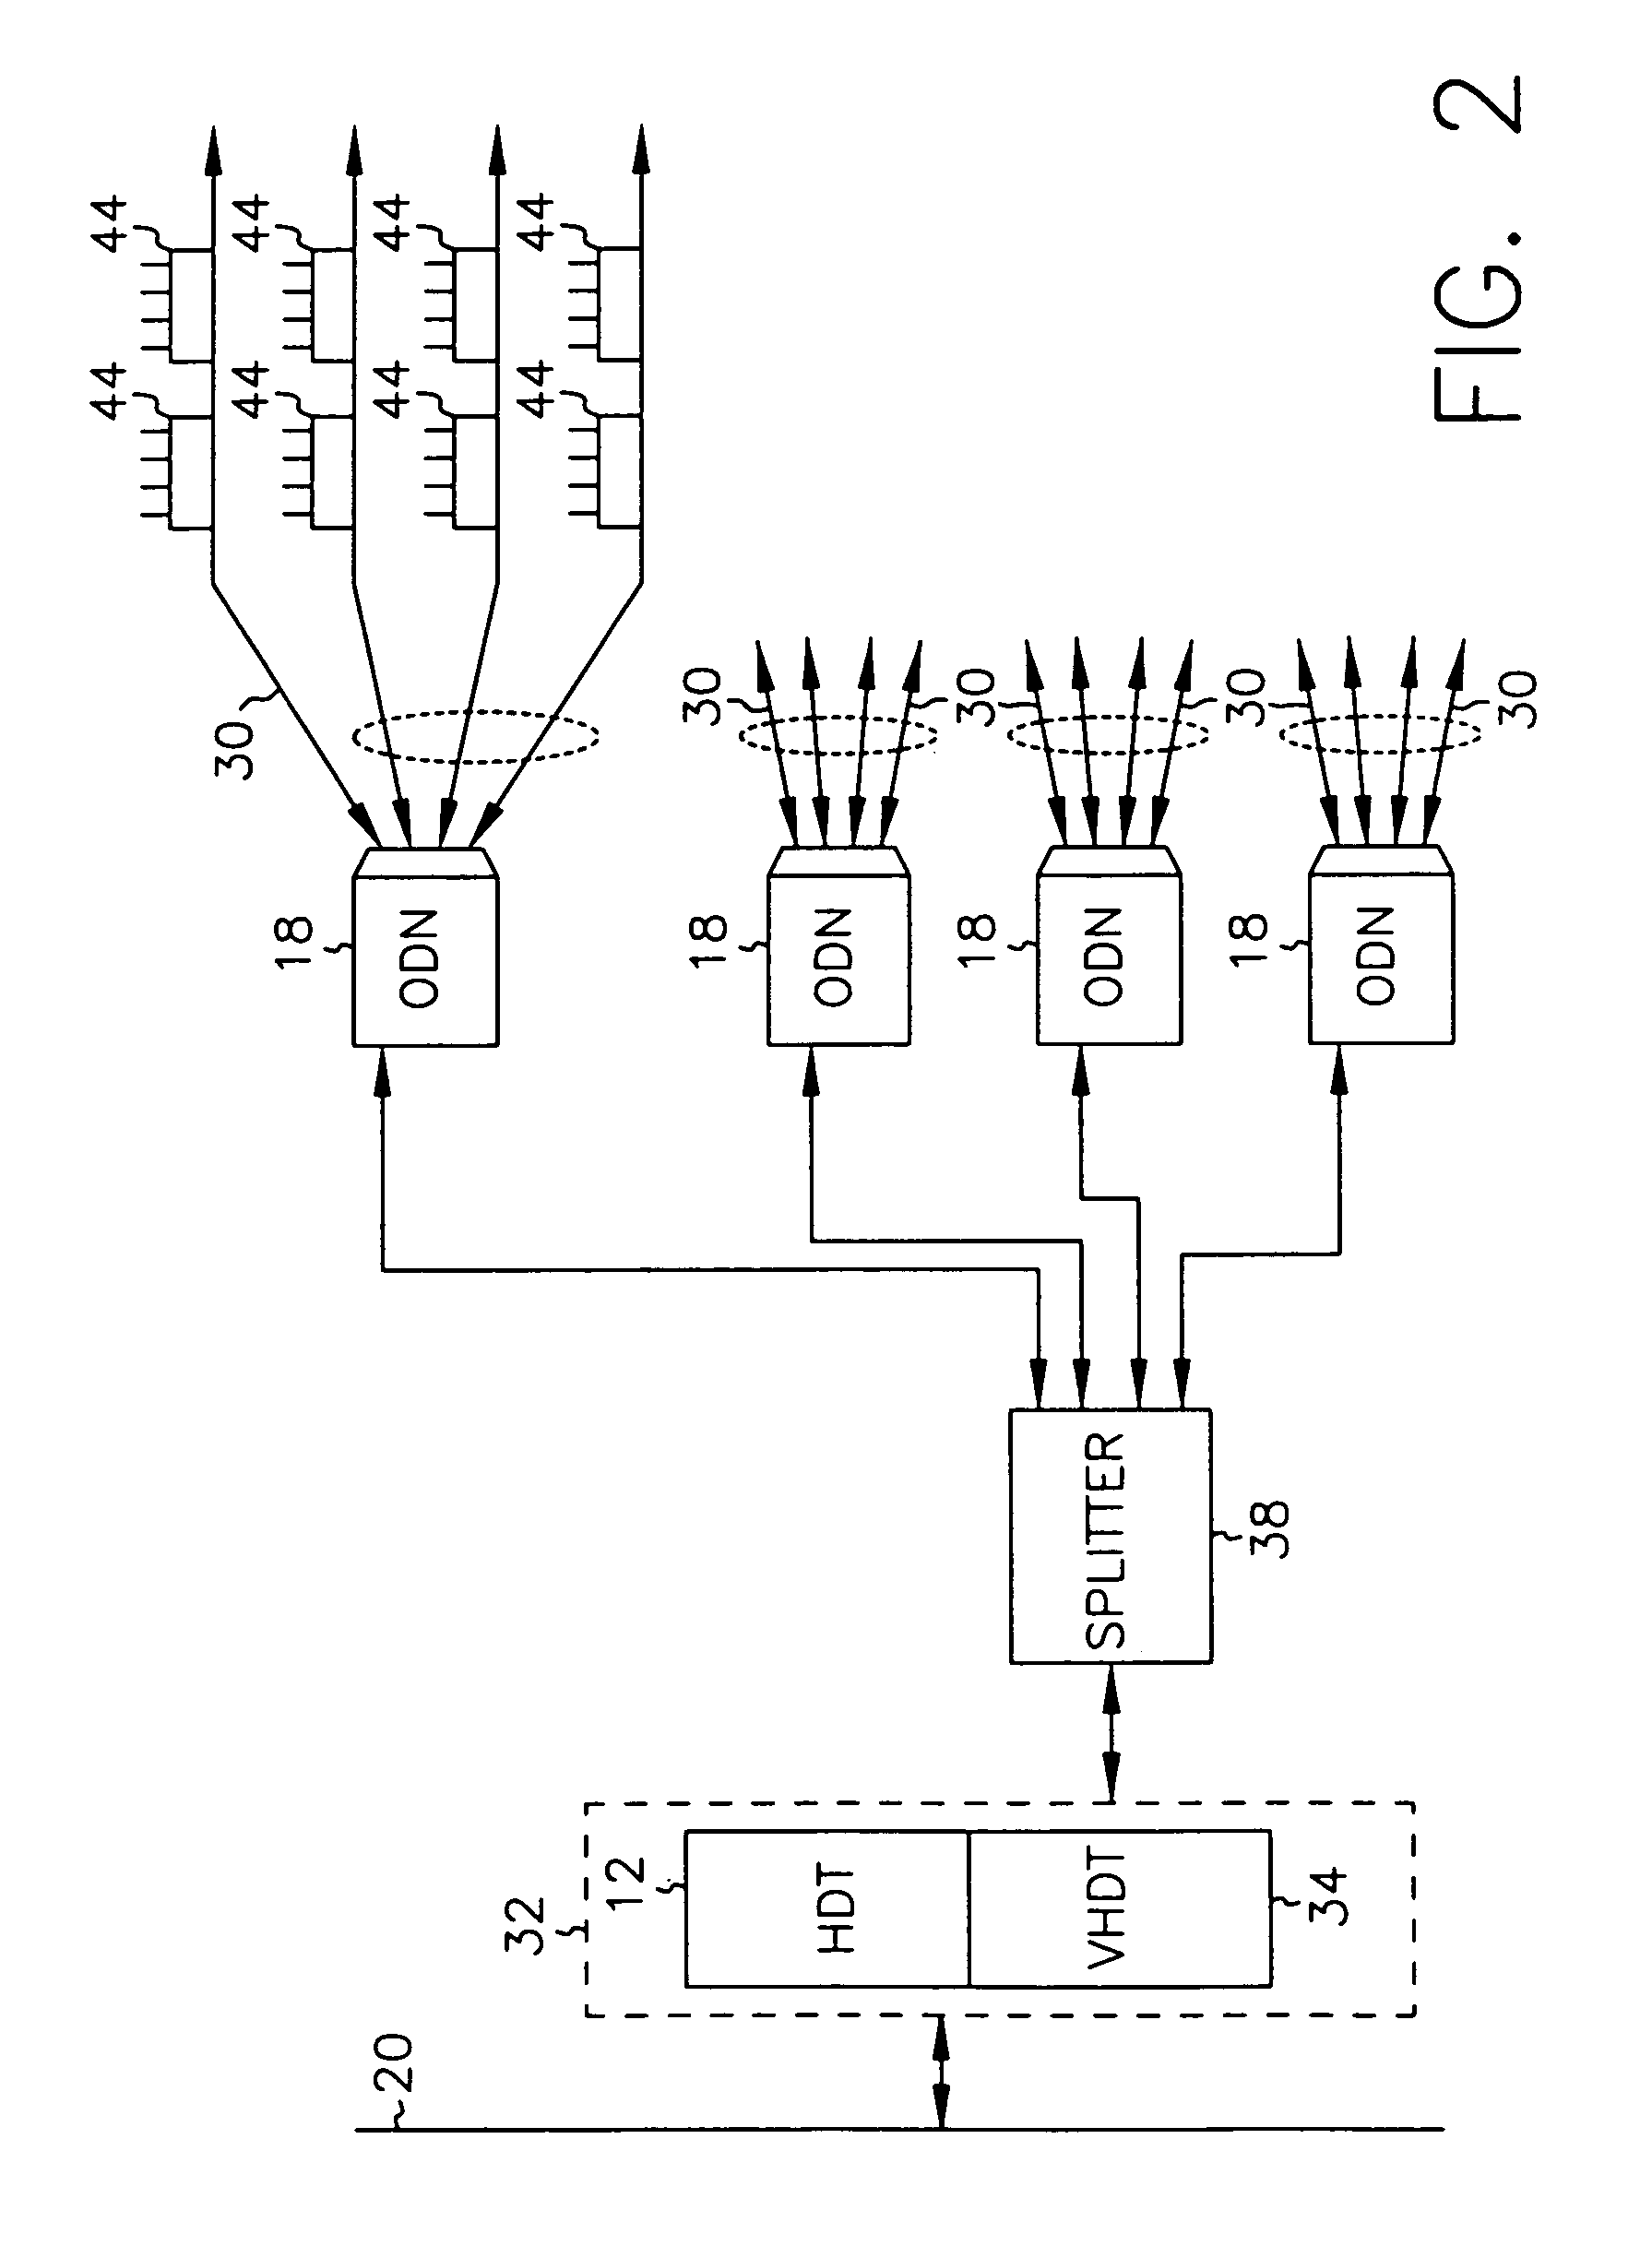 Dynamic allocation of transmission bandwidth in a communication system